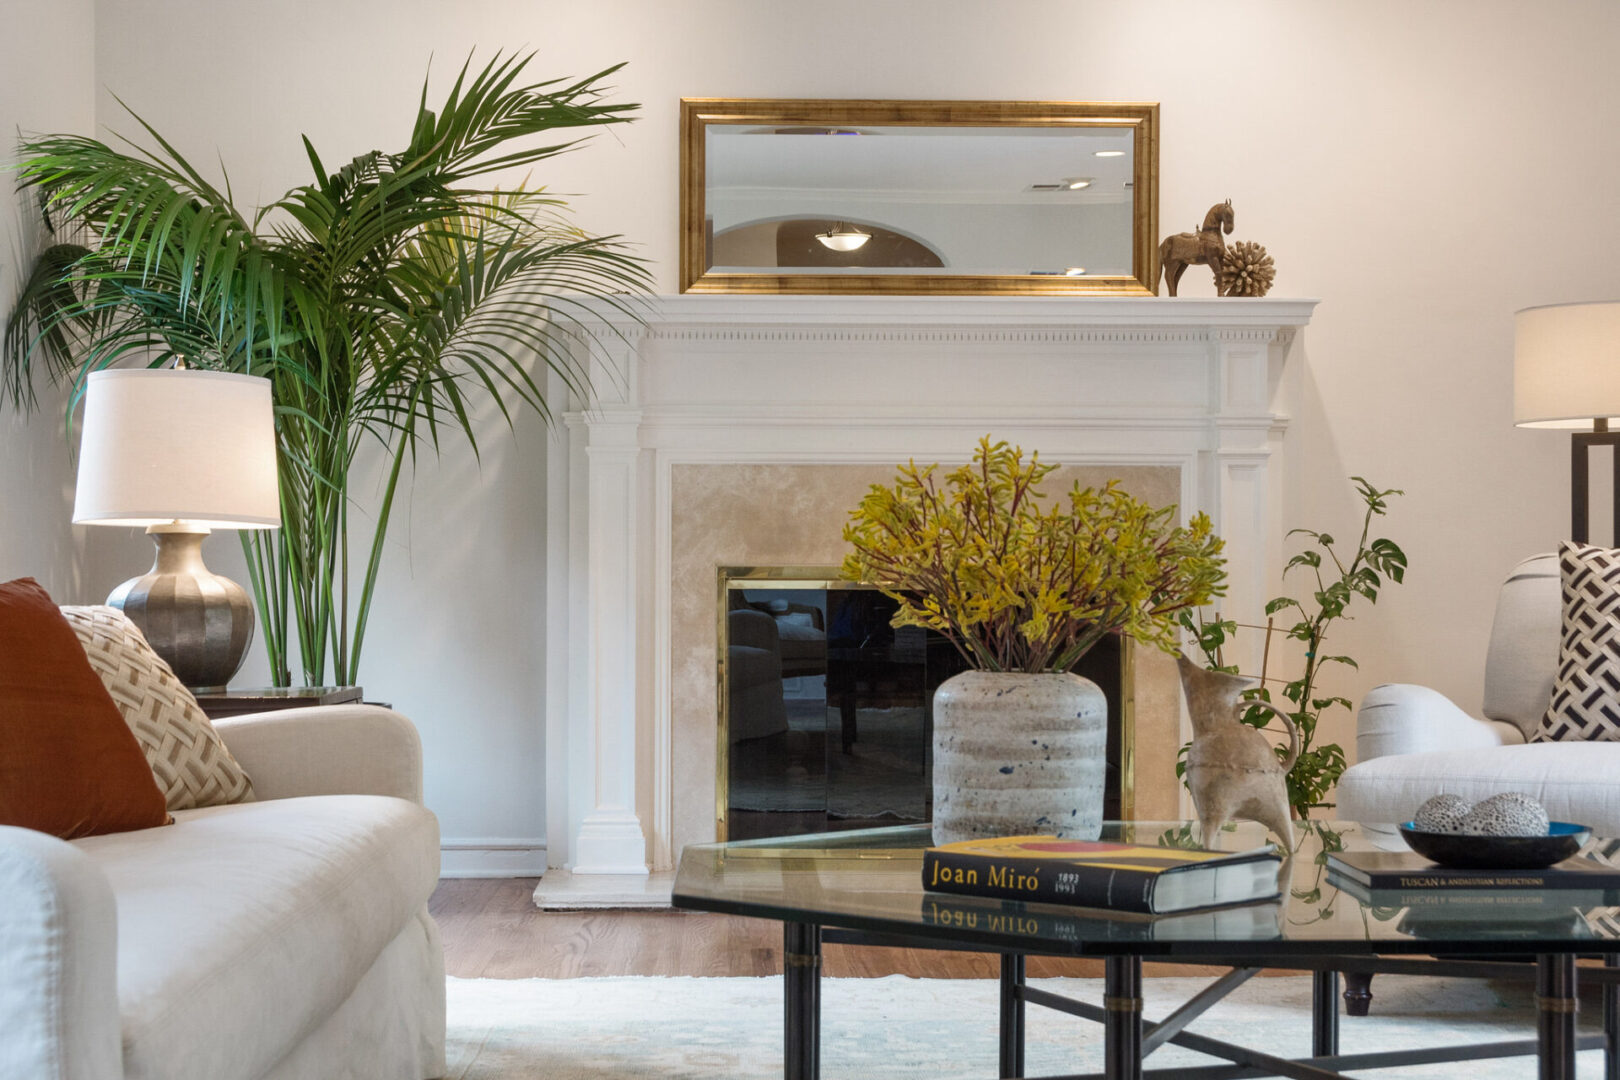 A living room with a fireplace and plants